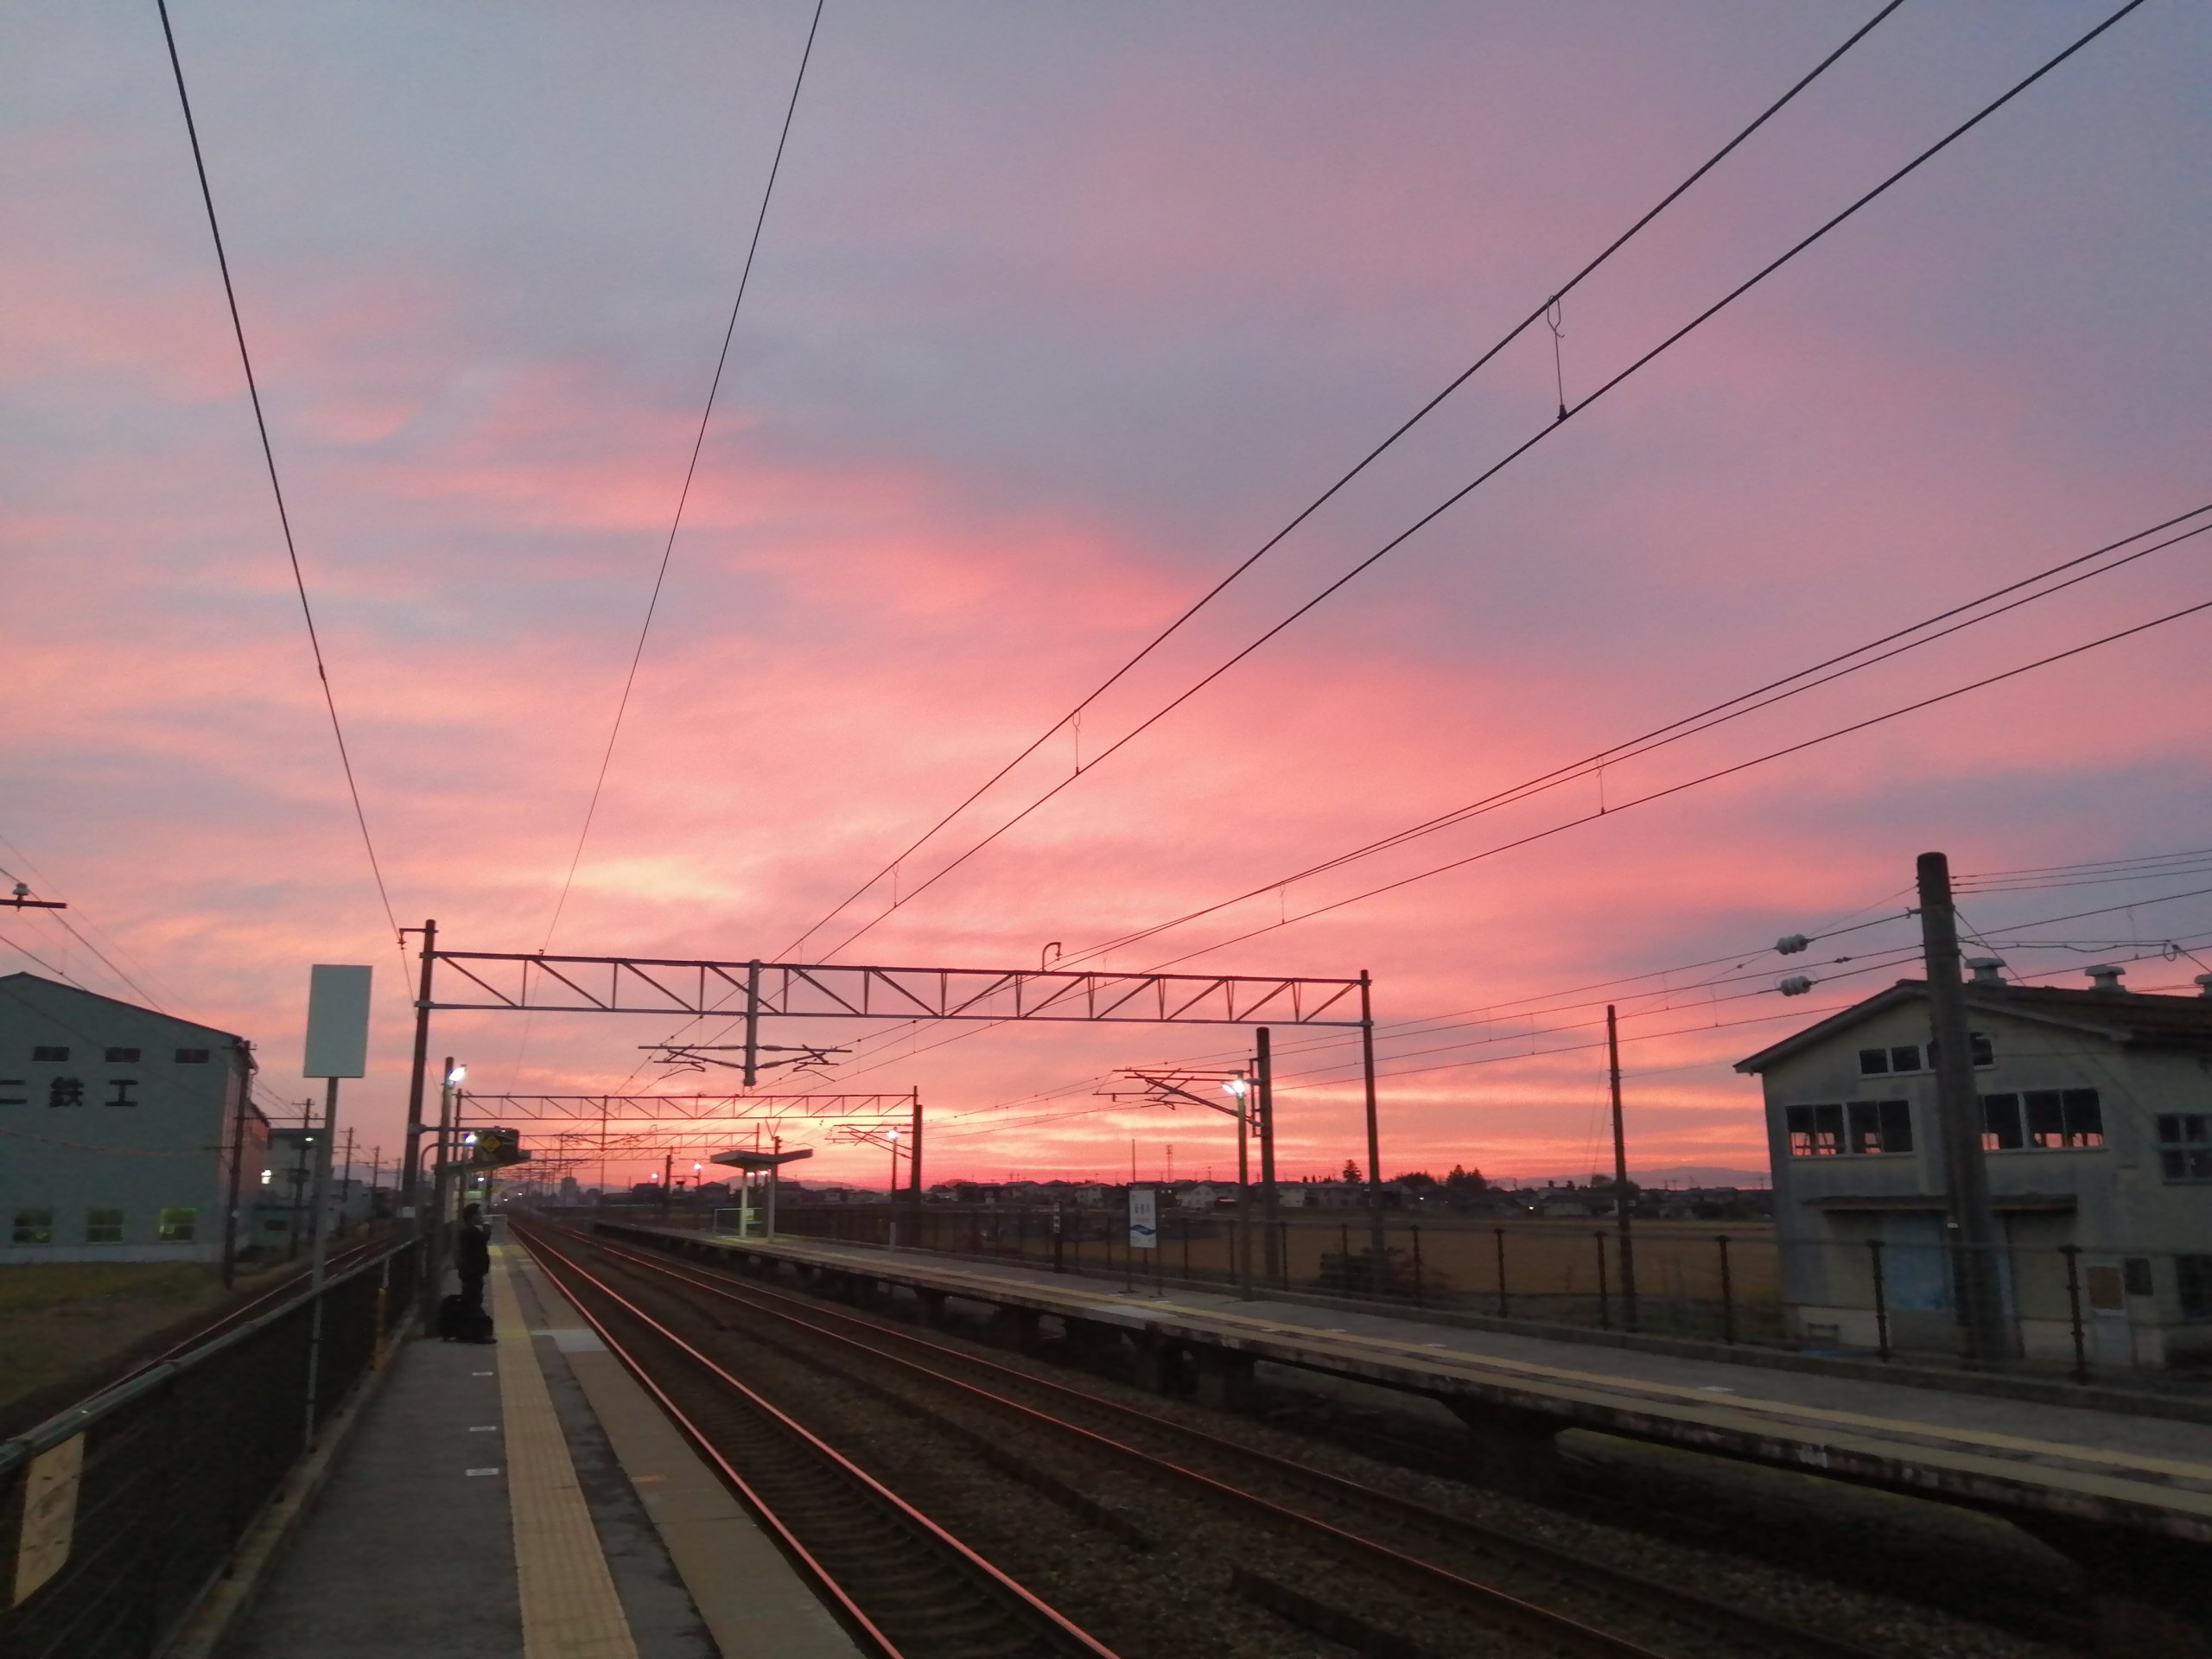 Beautiful sunset while waiting for the train.